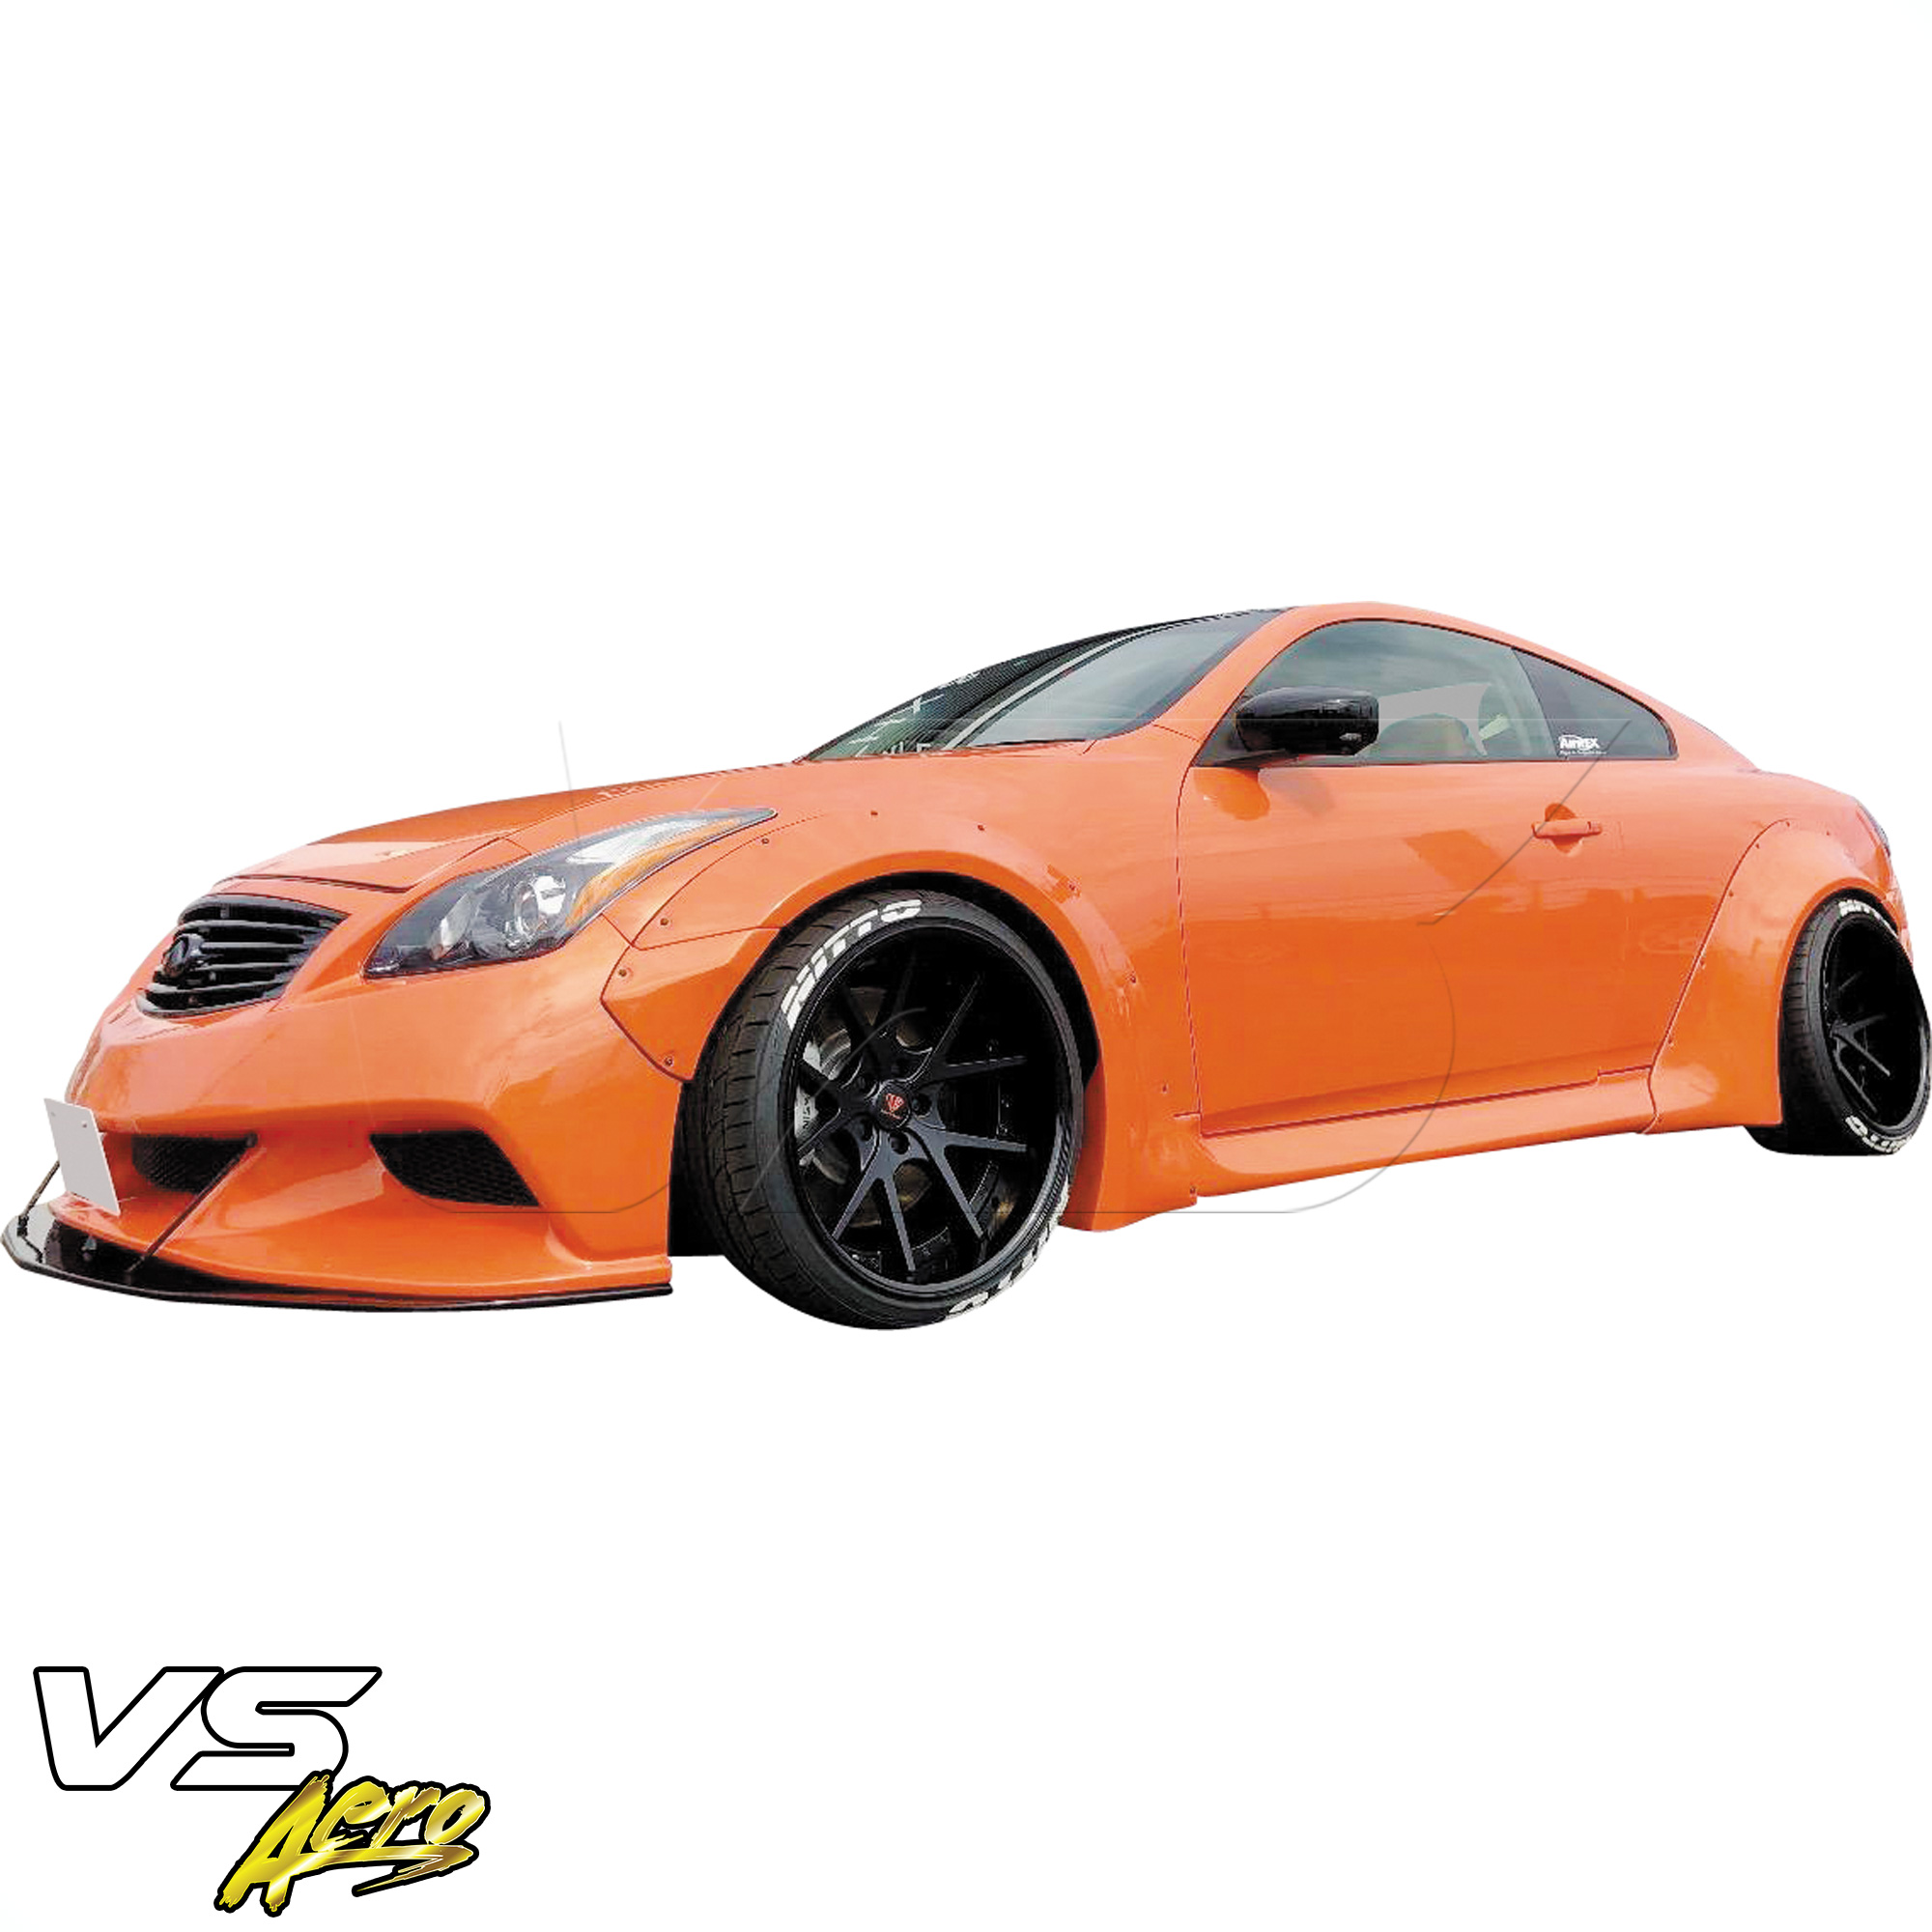 VSaero FRP LBPE Wide Body Fender Flares (front) 4pc > Infiniti G37 Coupe 2008-2015 > 2dr Coupe - Image 6